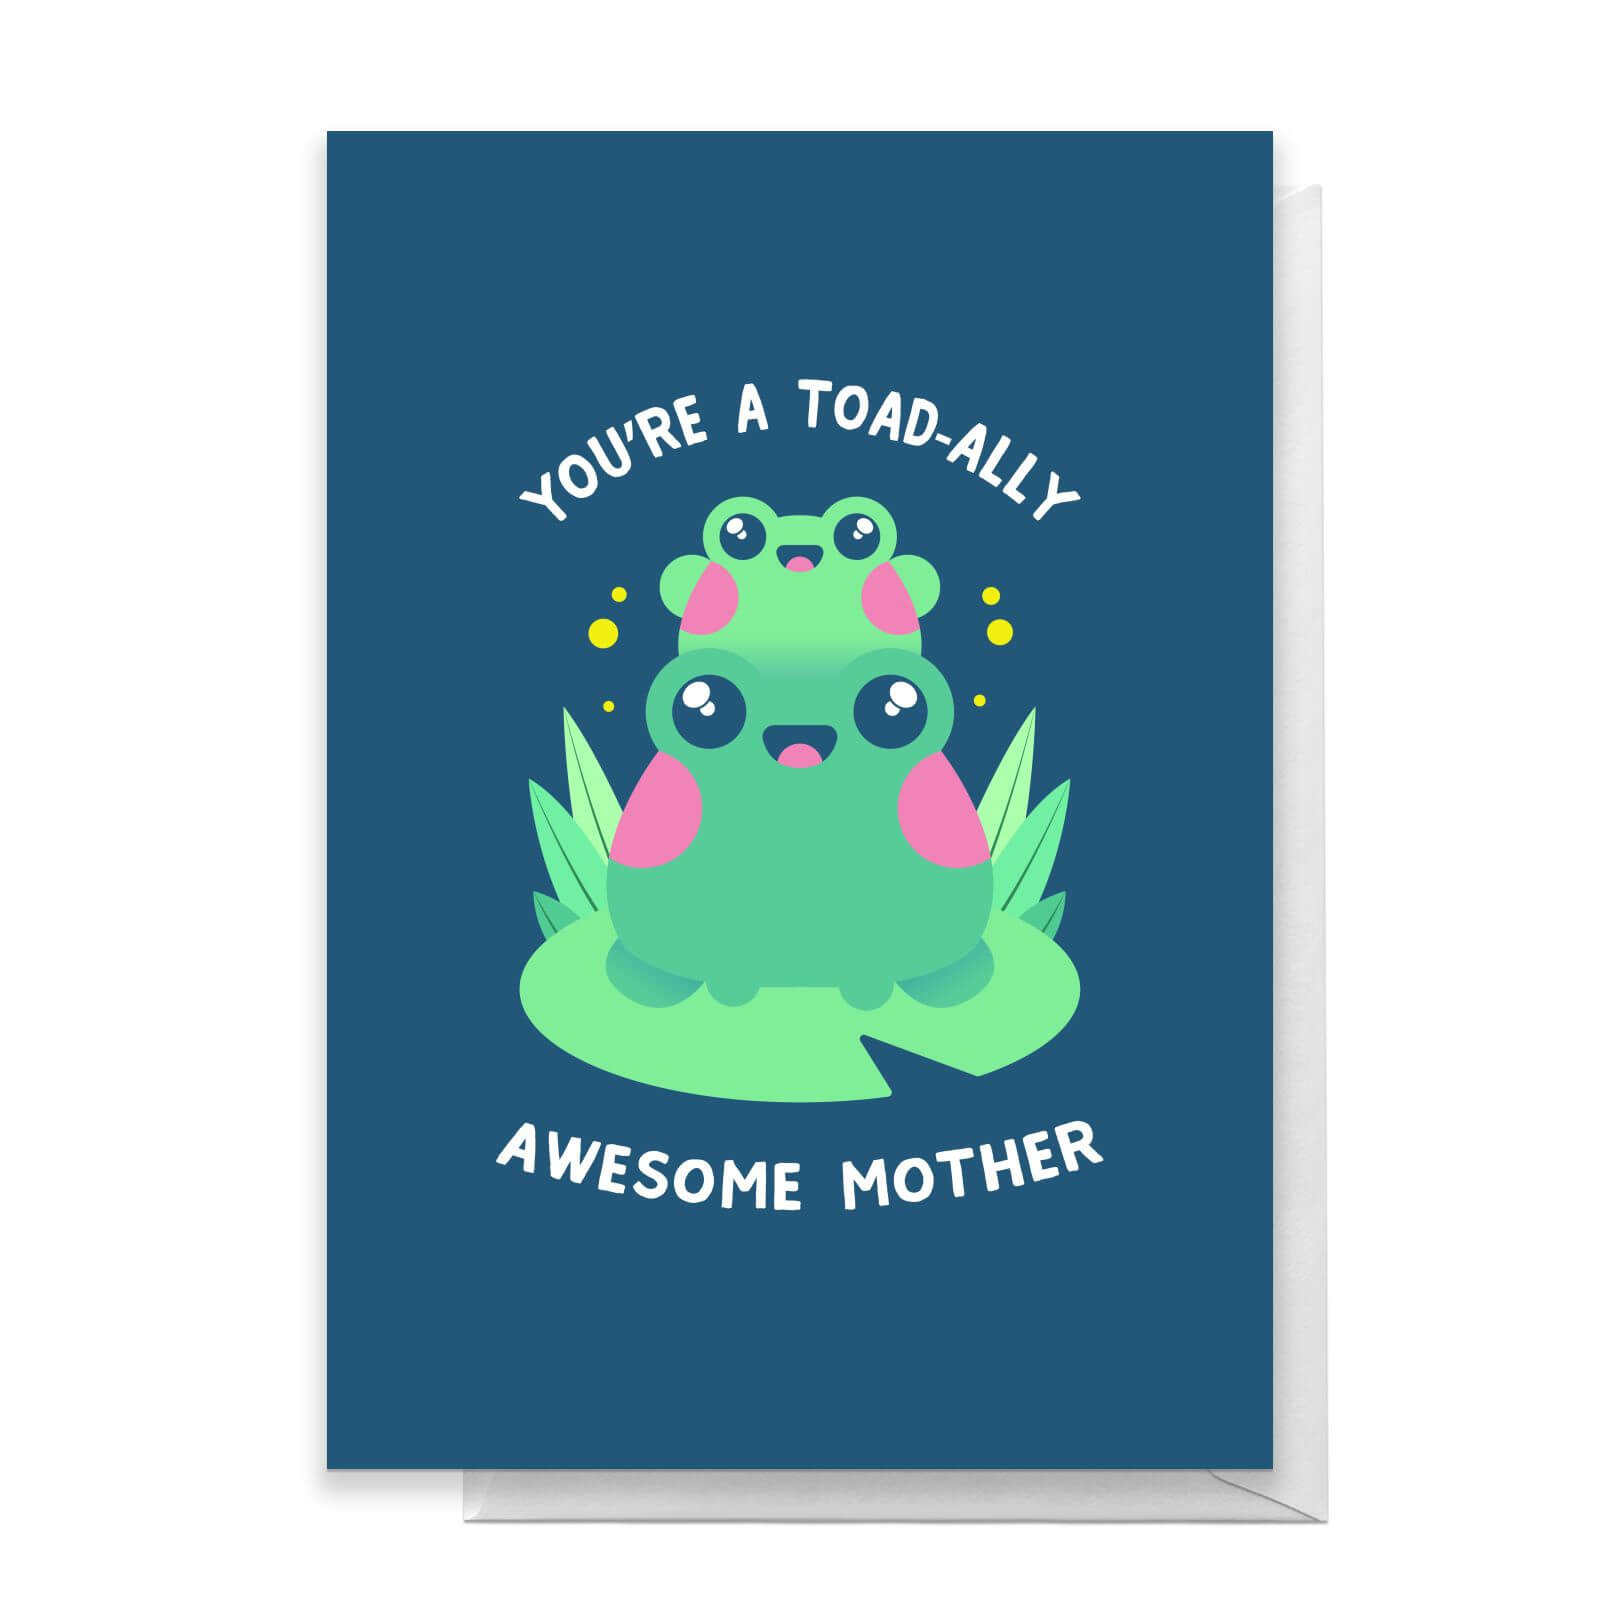 You're A Toad-ally Awesome Mother Greetings Card - Standard Card